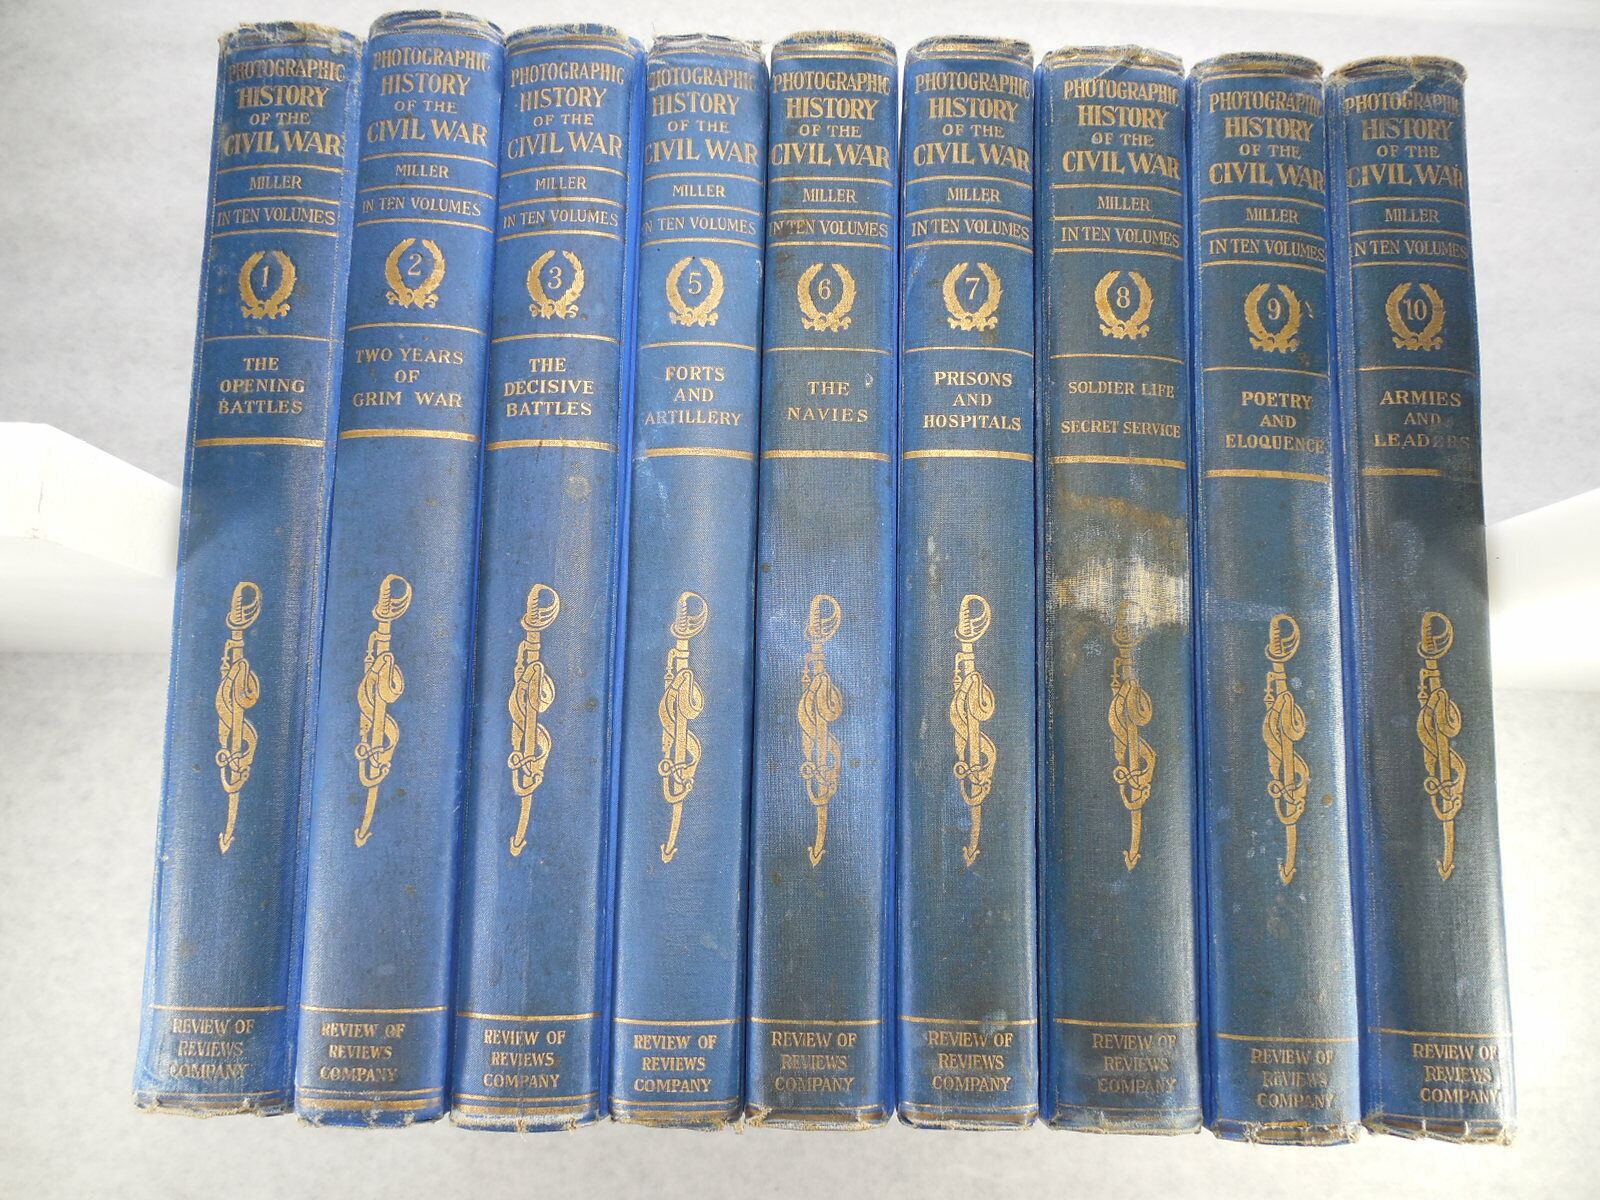 The Photographic History of the Civil War, 9 of 10 Volumes, 1911&1912, Ohio Vet